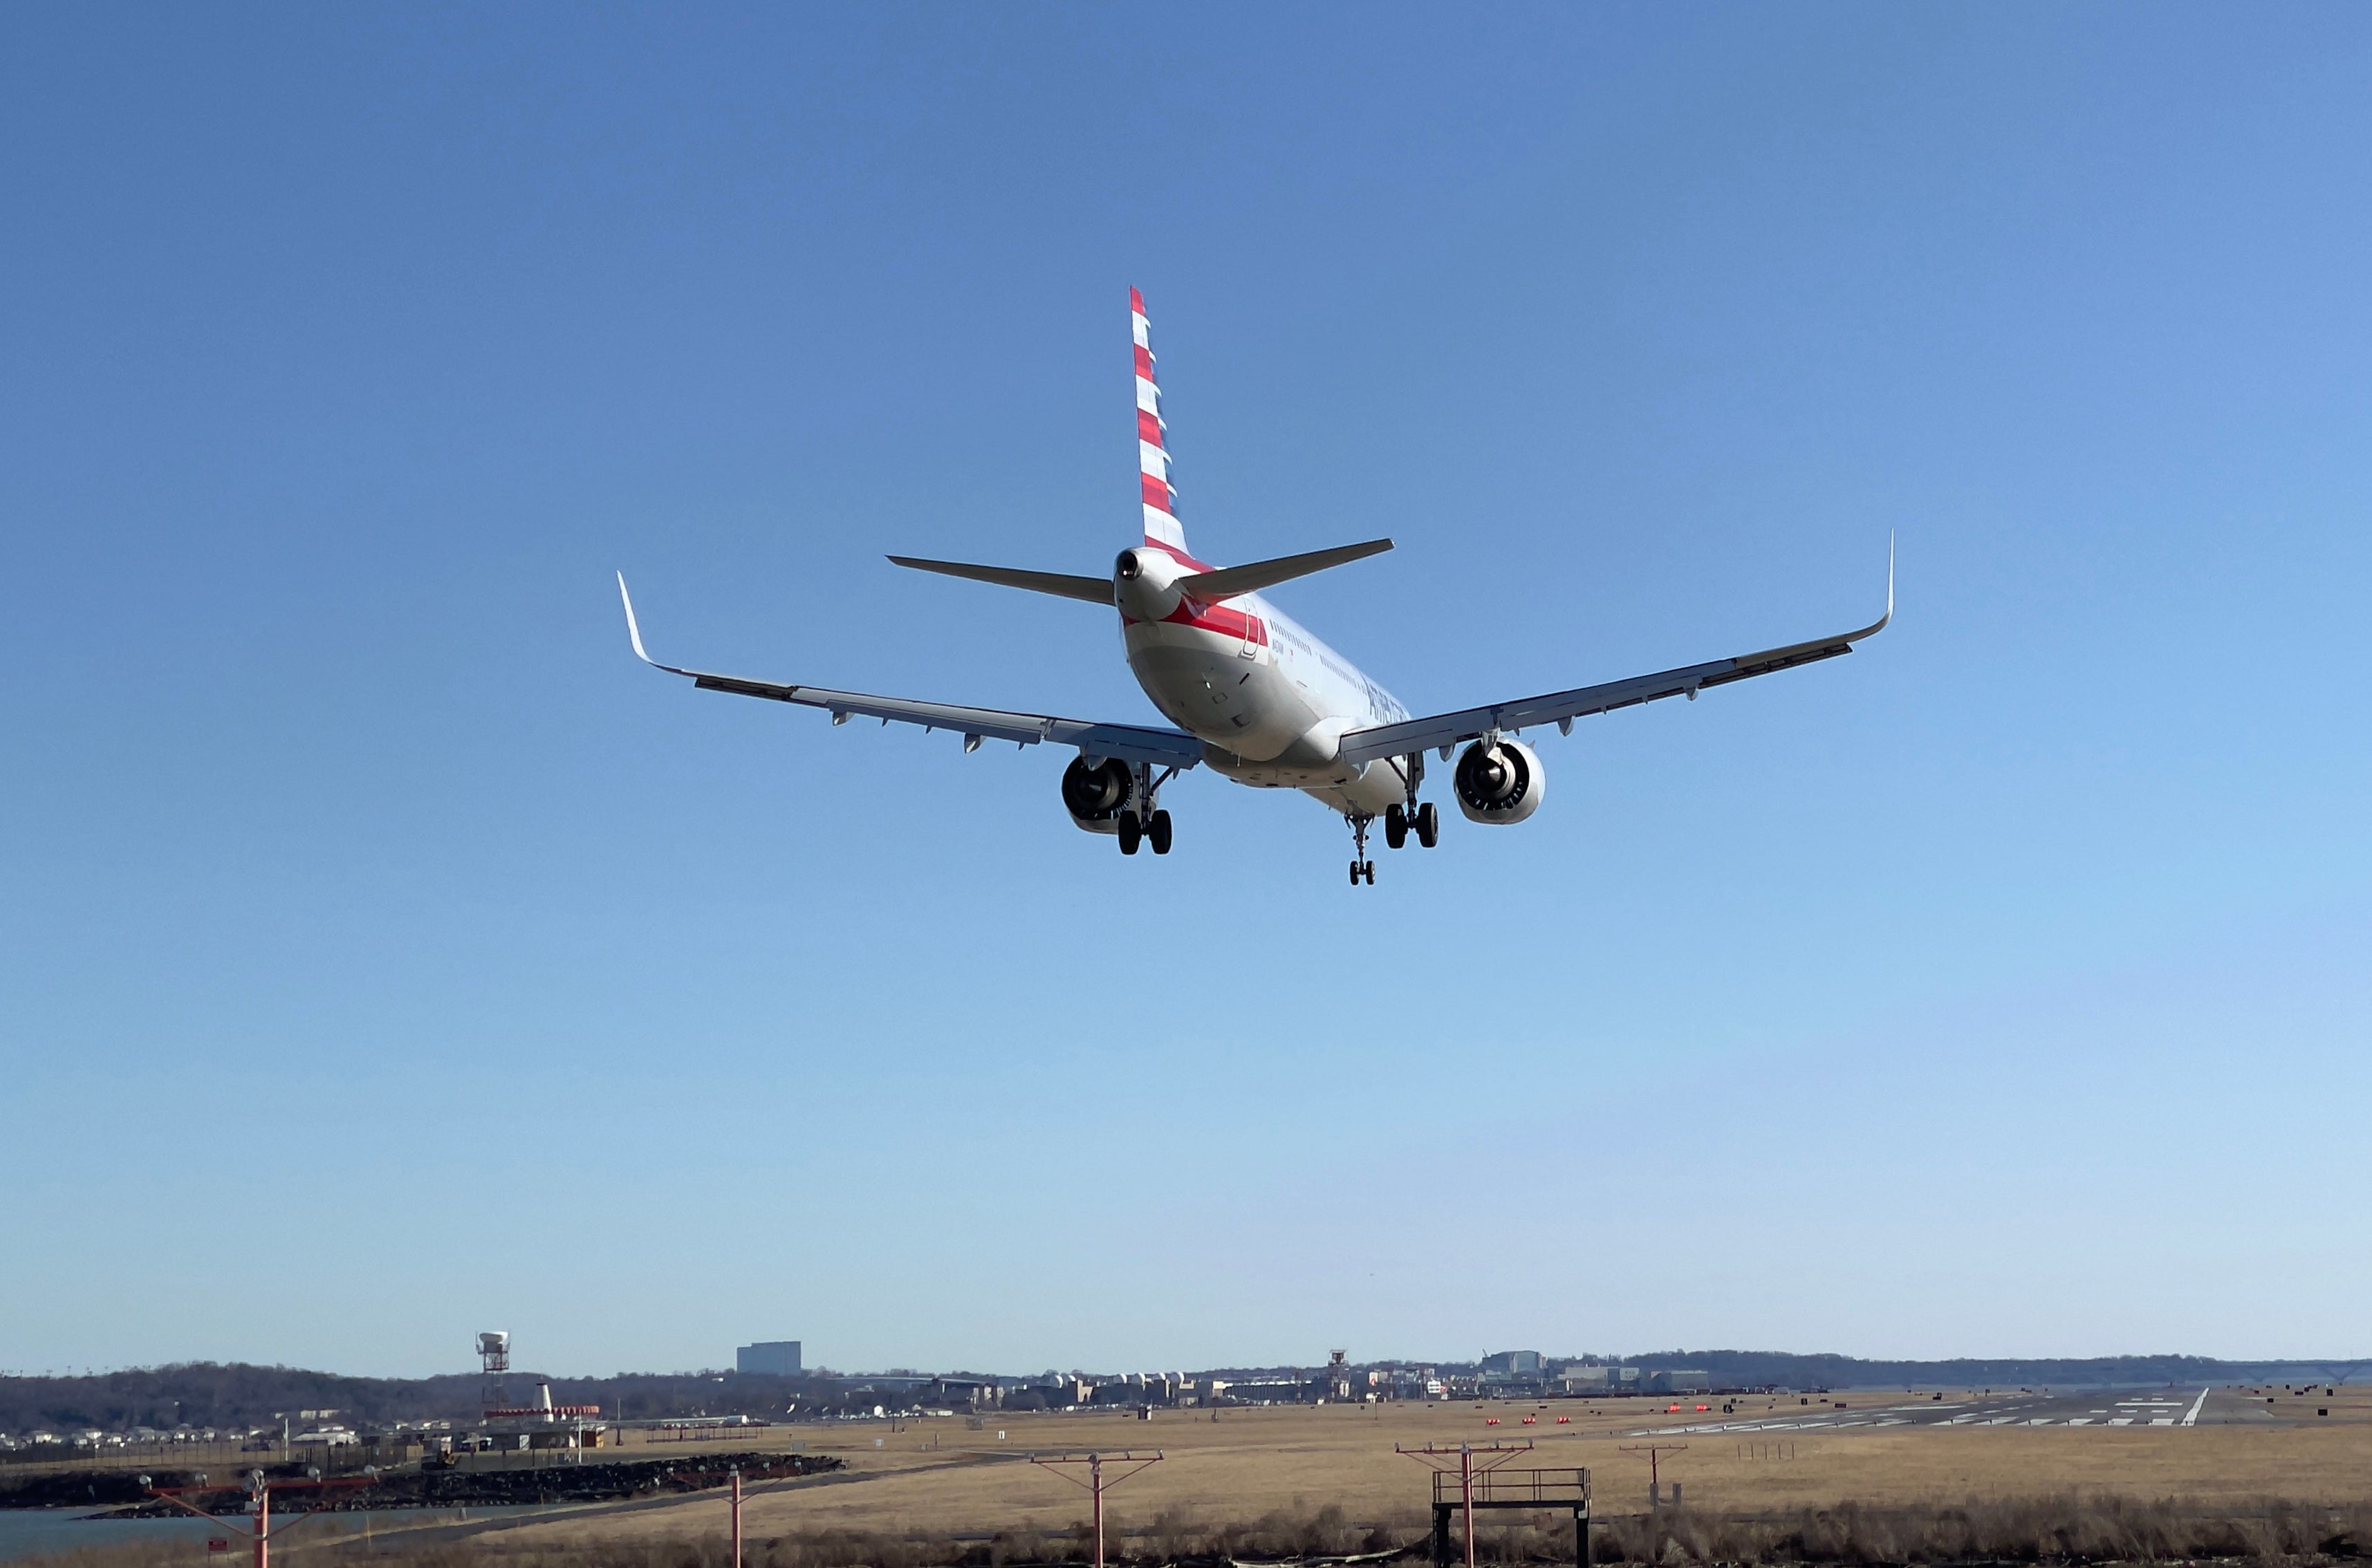 File: An American Airlines plane approaches Washington Ronald Reagan National Airport in Arlington, Virginia on 24 February, 2021